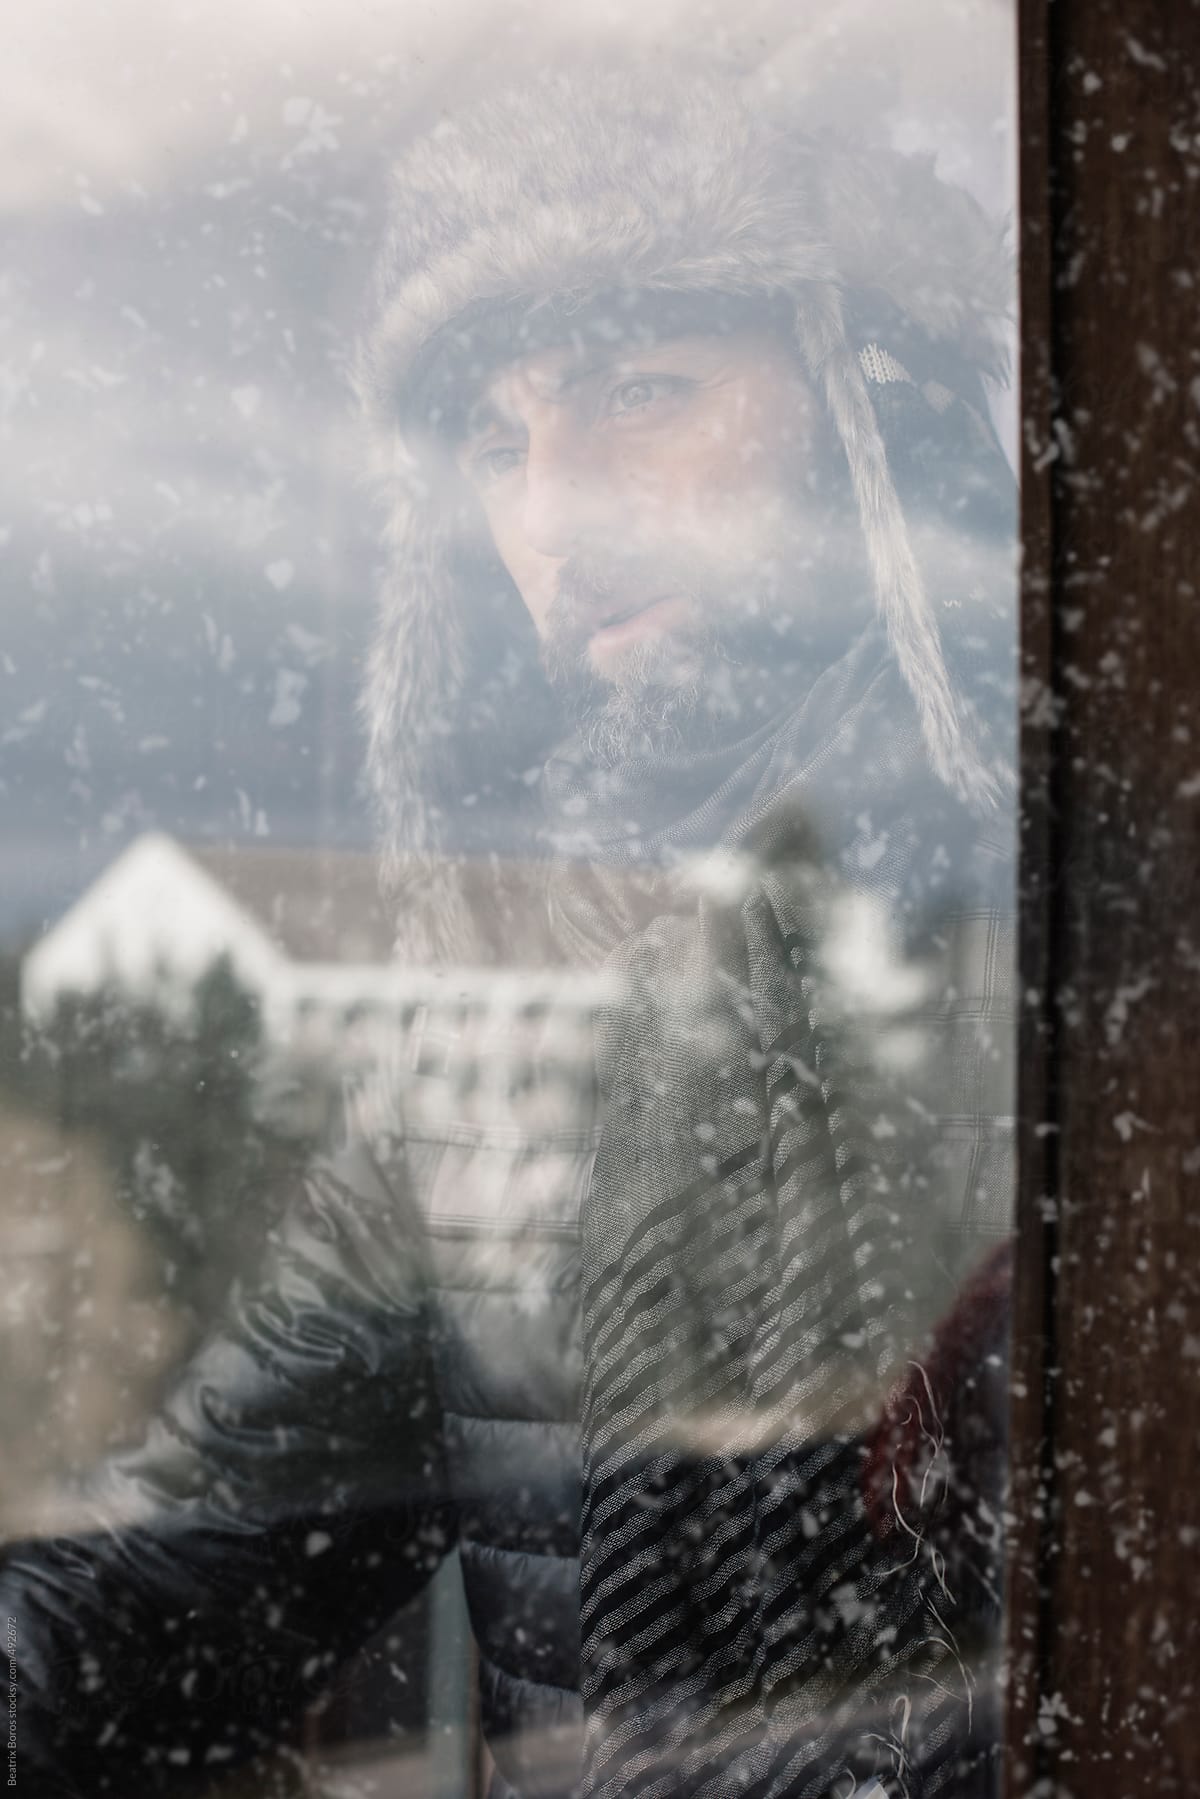 Portrait of a man behind window reflection, wearing winter clothes and hat gazing out of the window